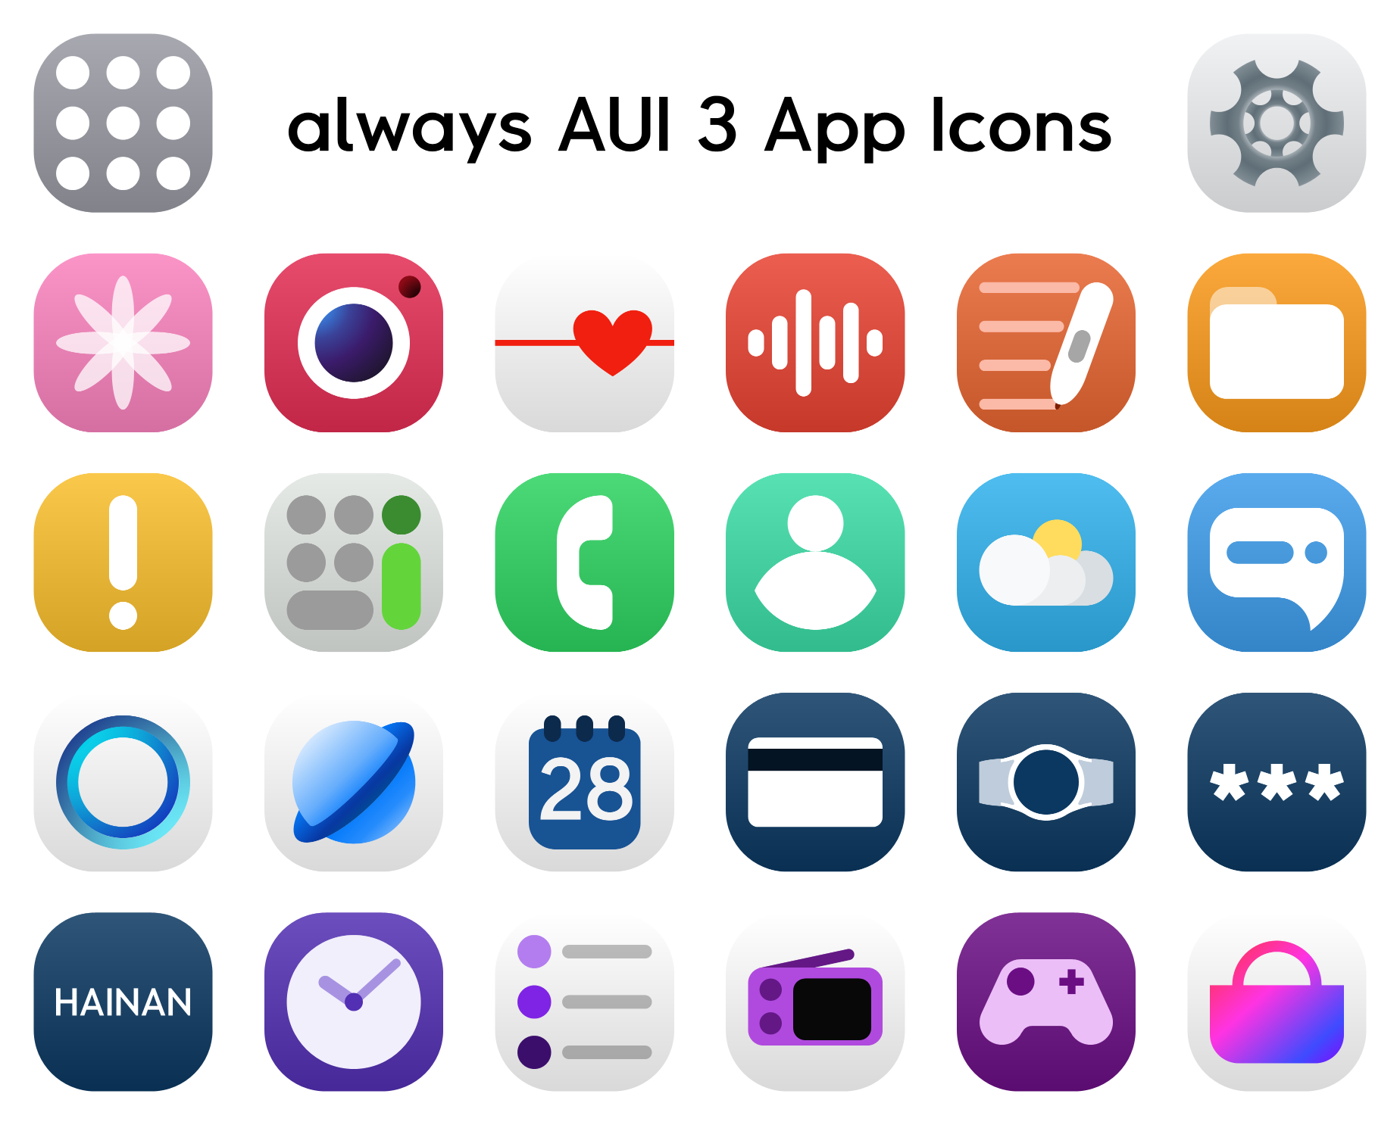 HAINAN always AUI 3 App Icons.png.png